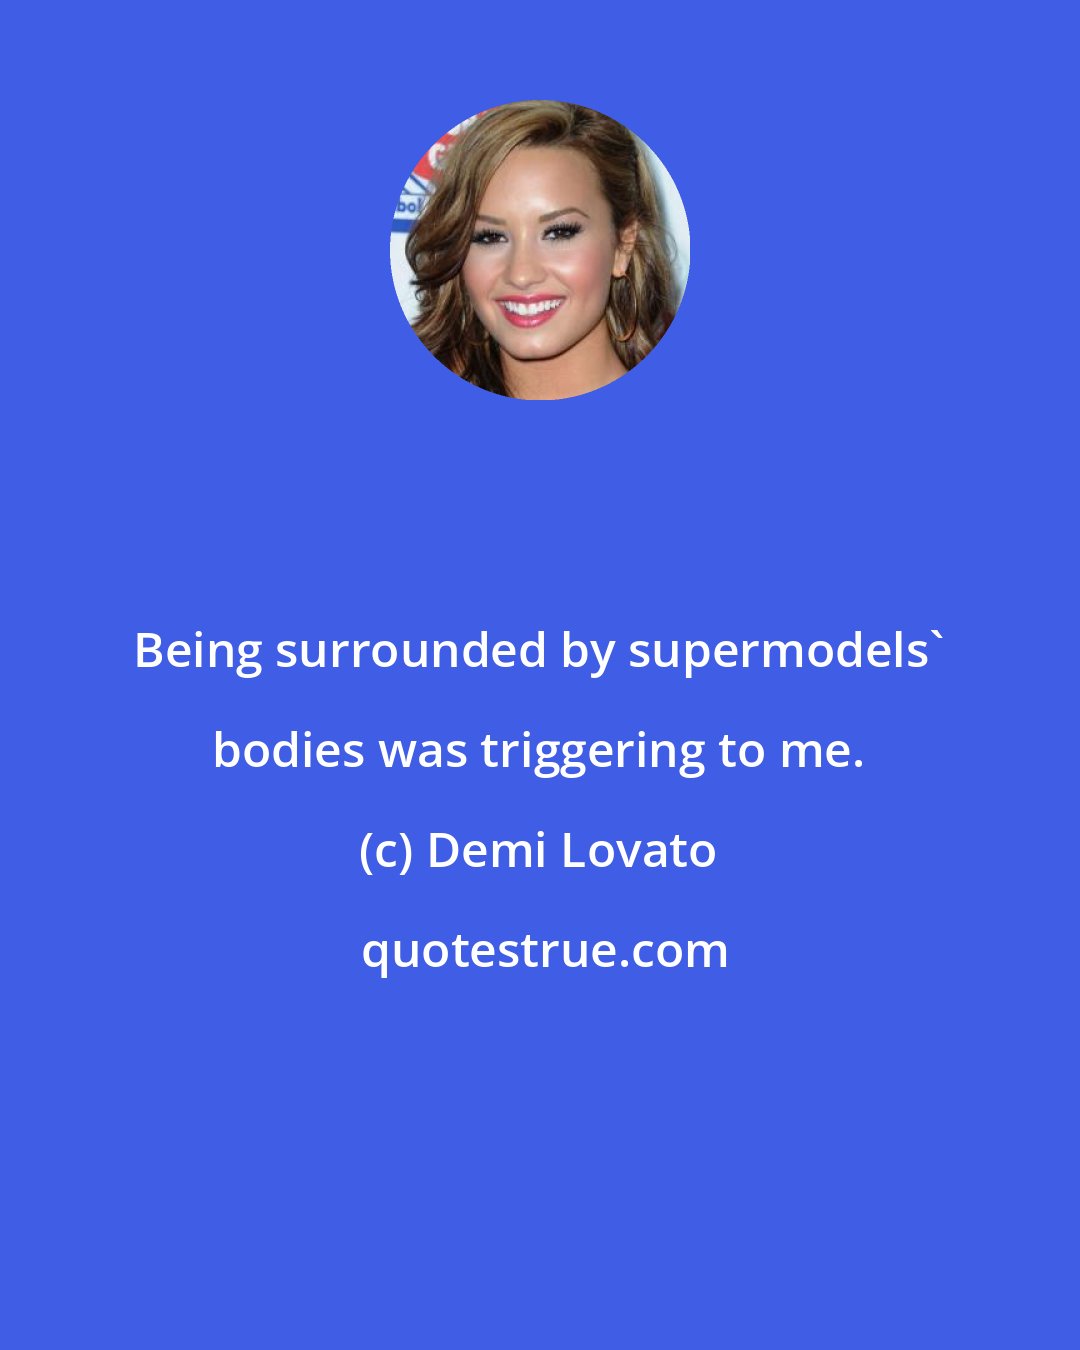 Demi Lovato: Being surrounded by supermodels' bodies was triggering to me.